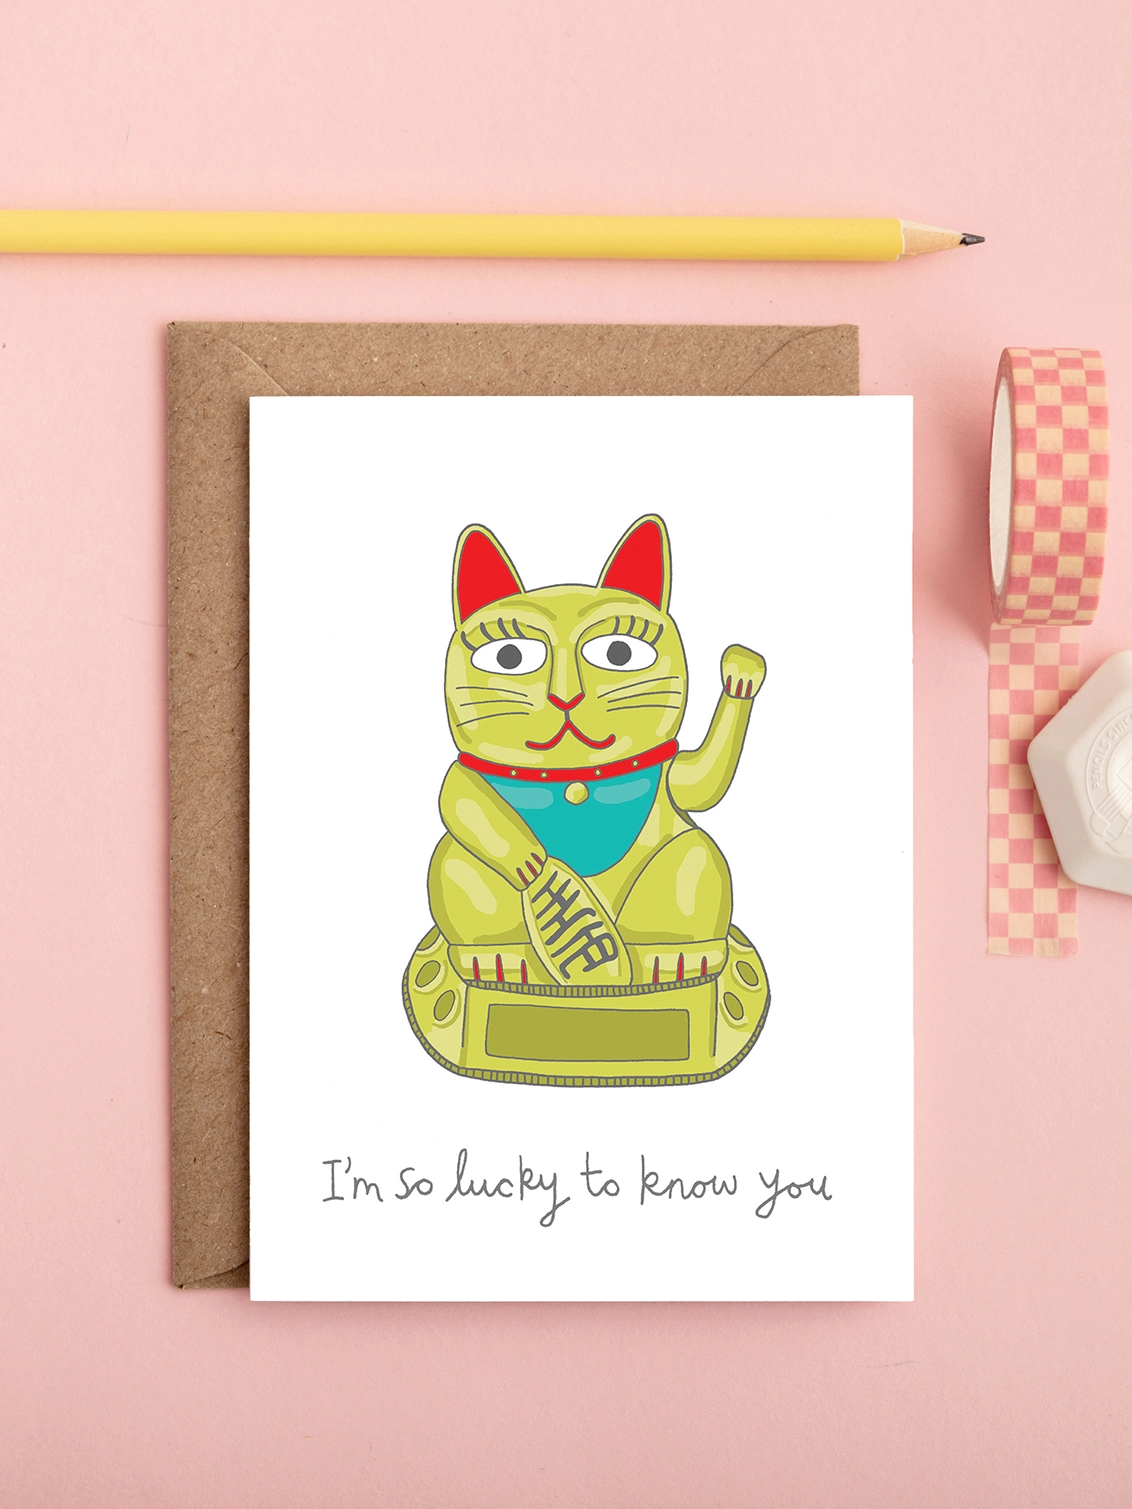 Funny friendship or greeting card featuring a waving Chinese cat 